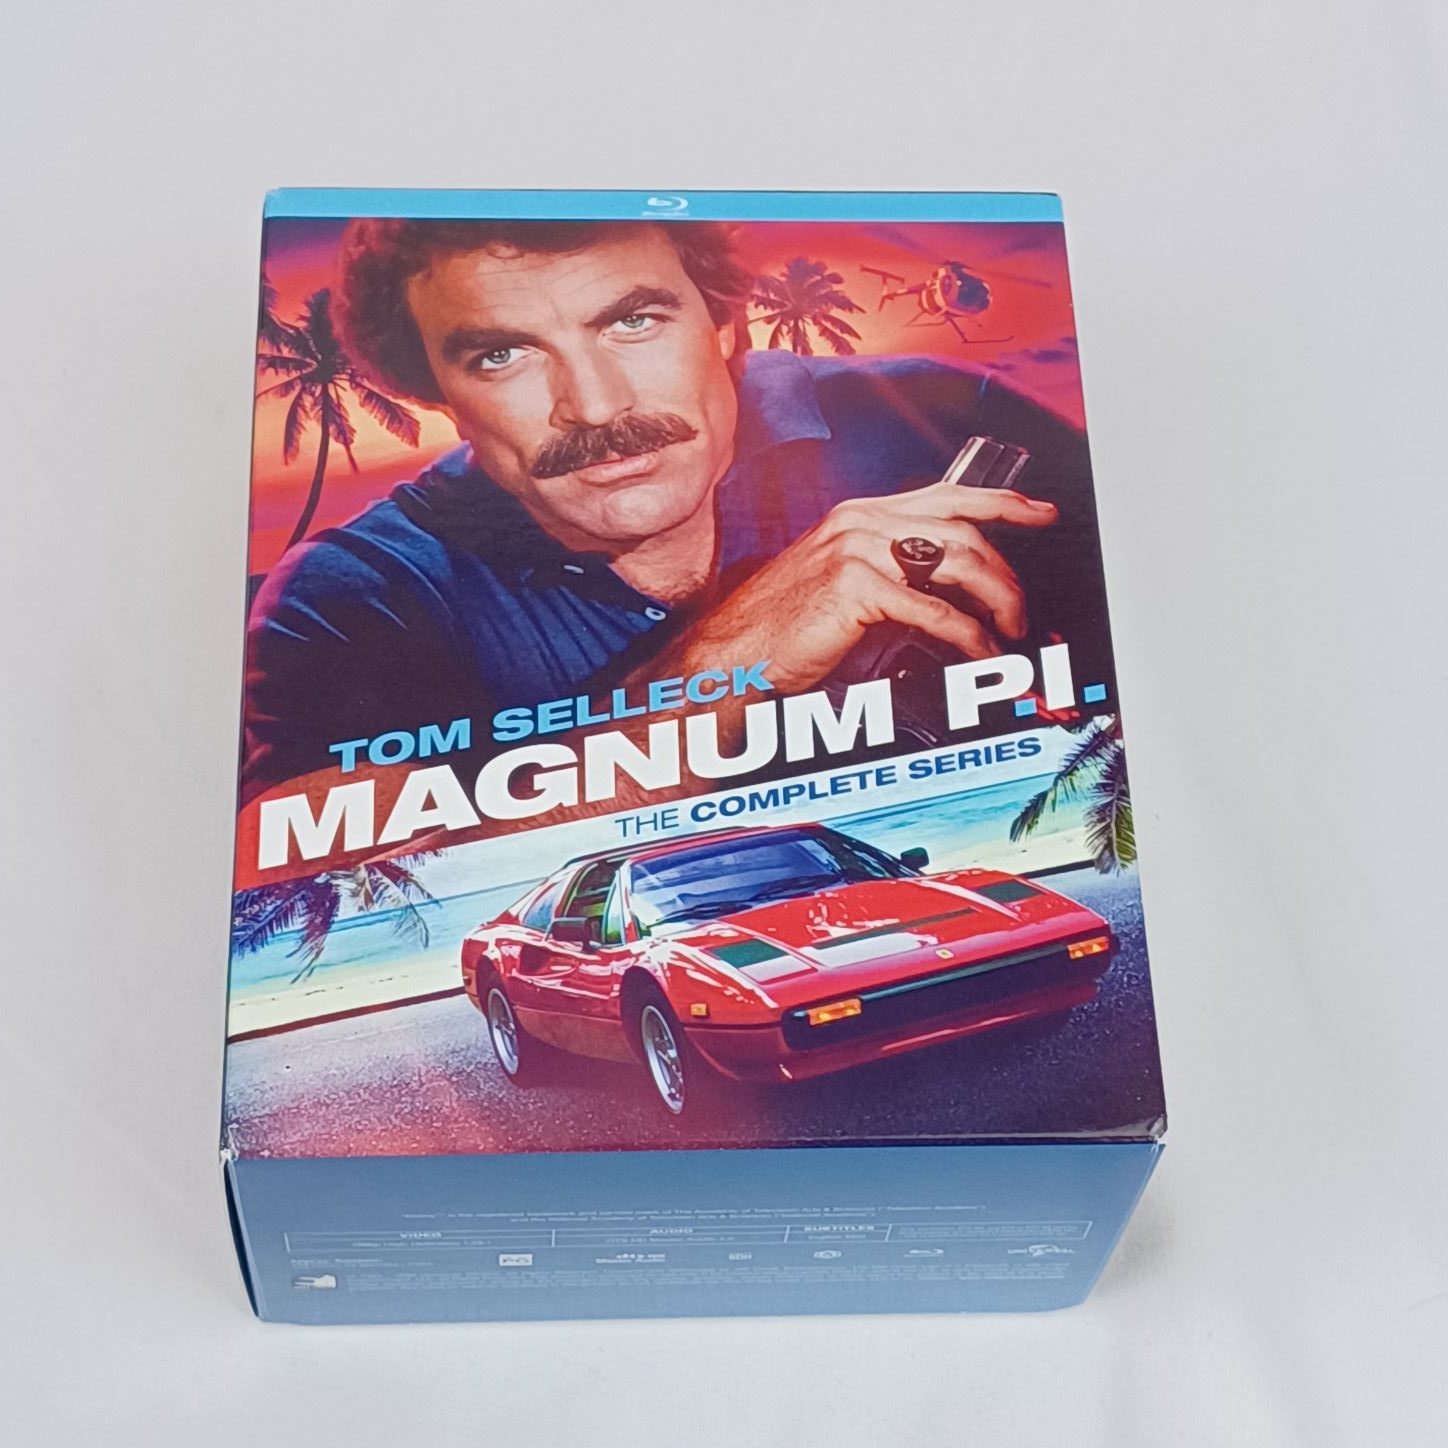 Magnum P.I.: The Complete Series Blu-ray Review - Geeky Hobbies